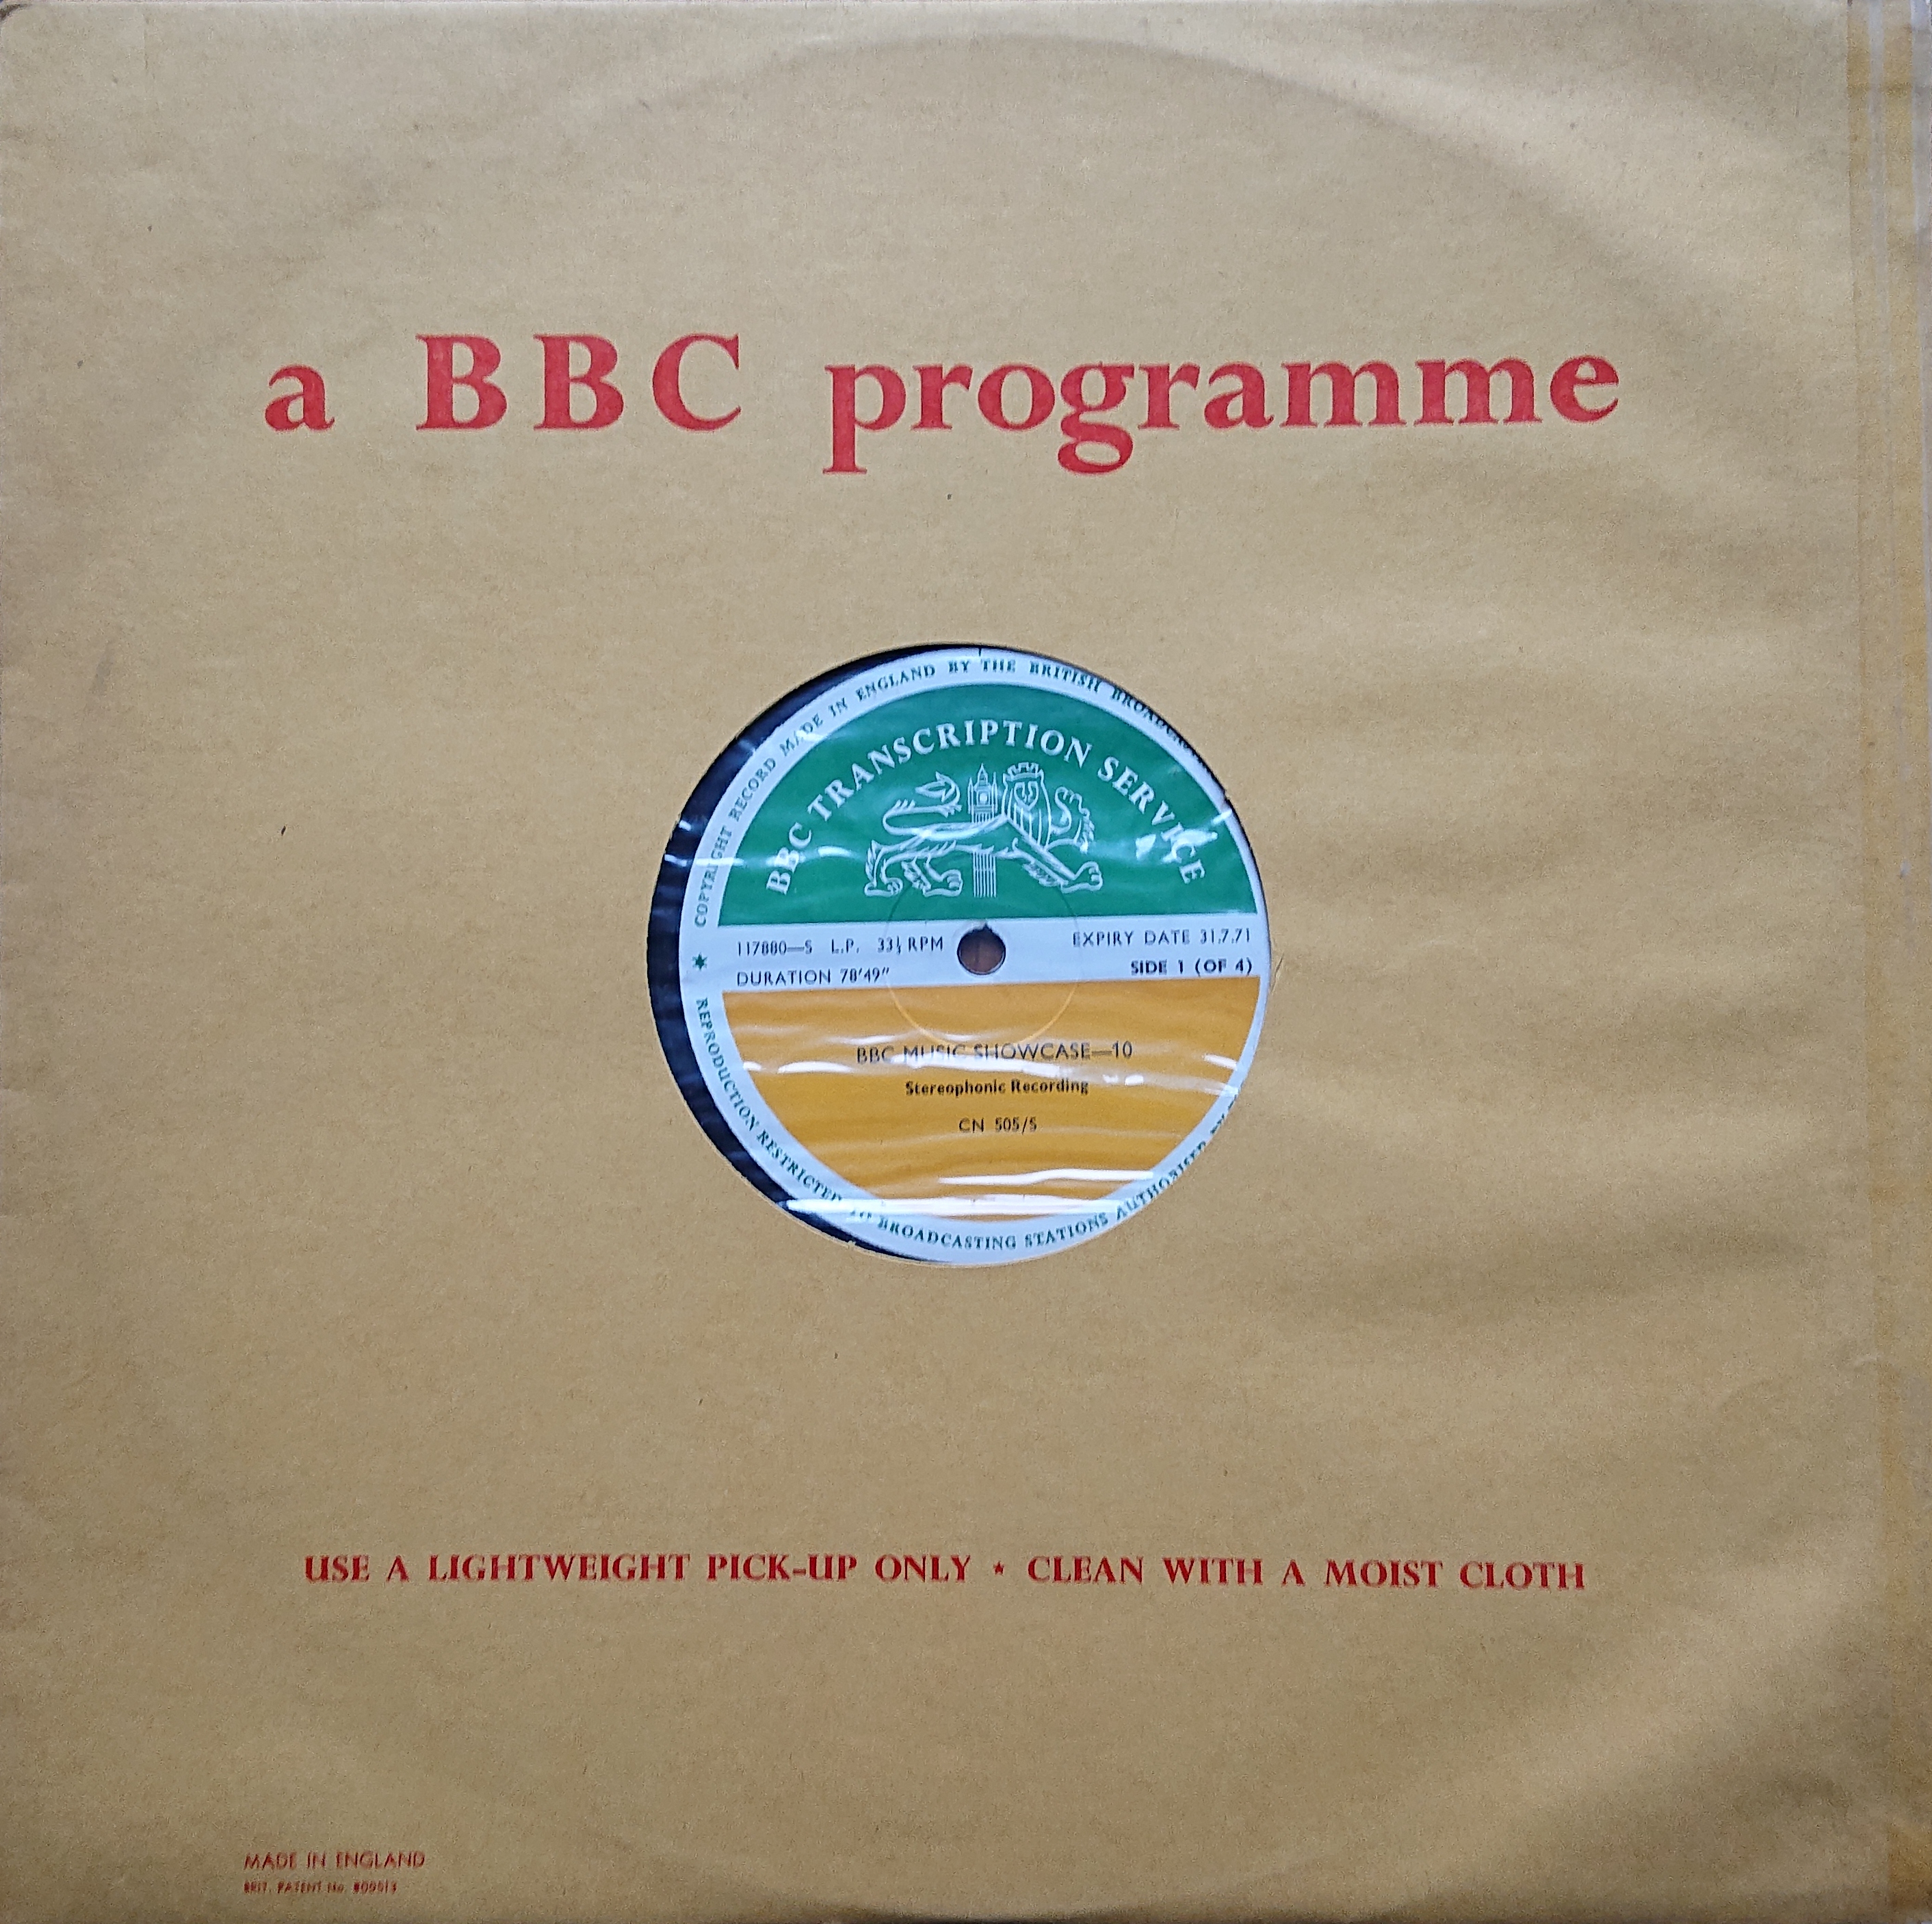 Picture of CN 505 S 19 BBC music showcase - 10 (Sides 1 & 3) by artist Various from the BBC records and Tapes library